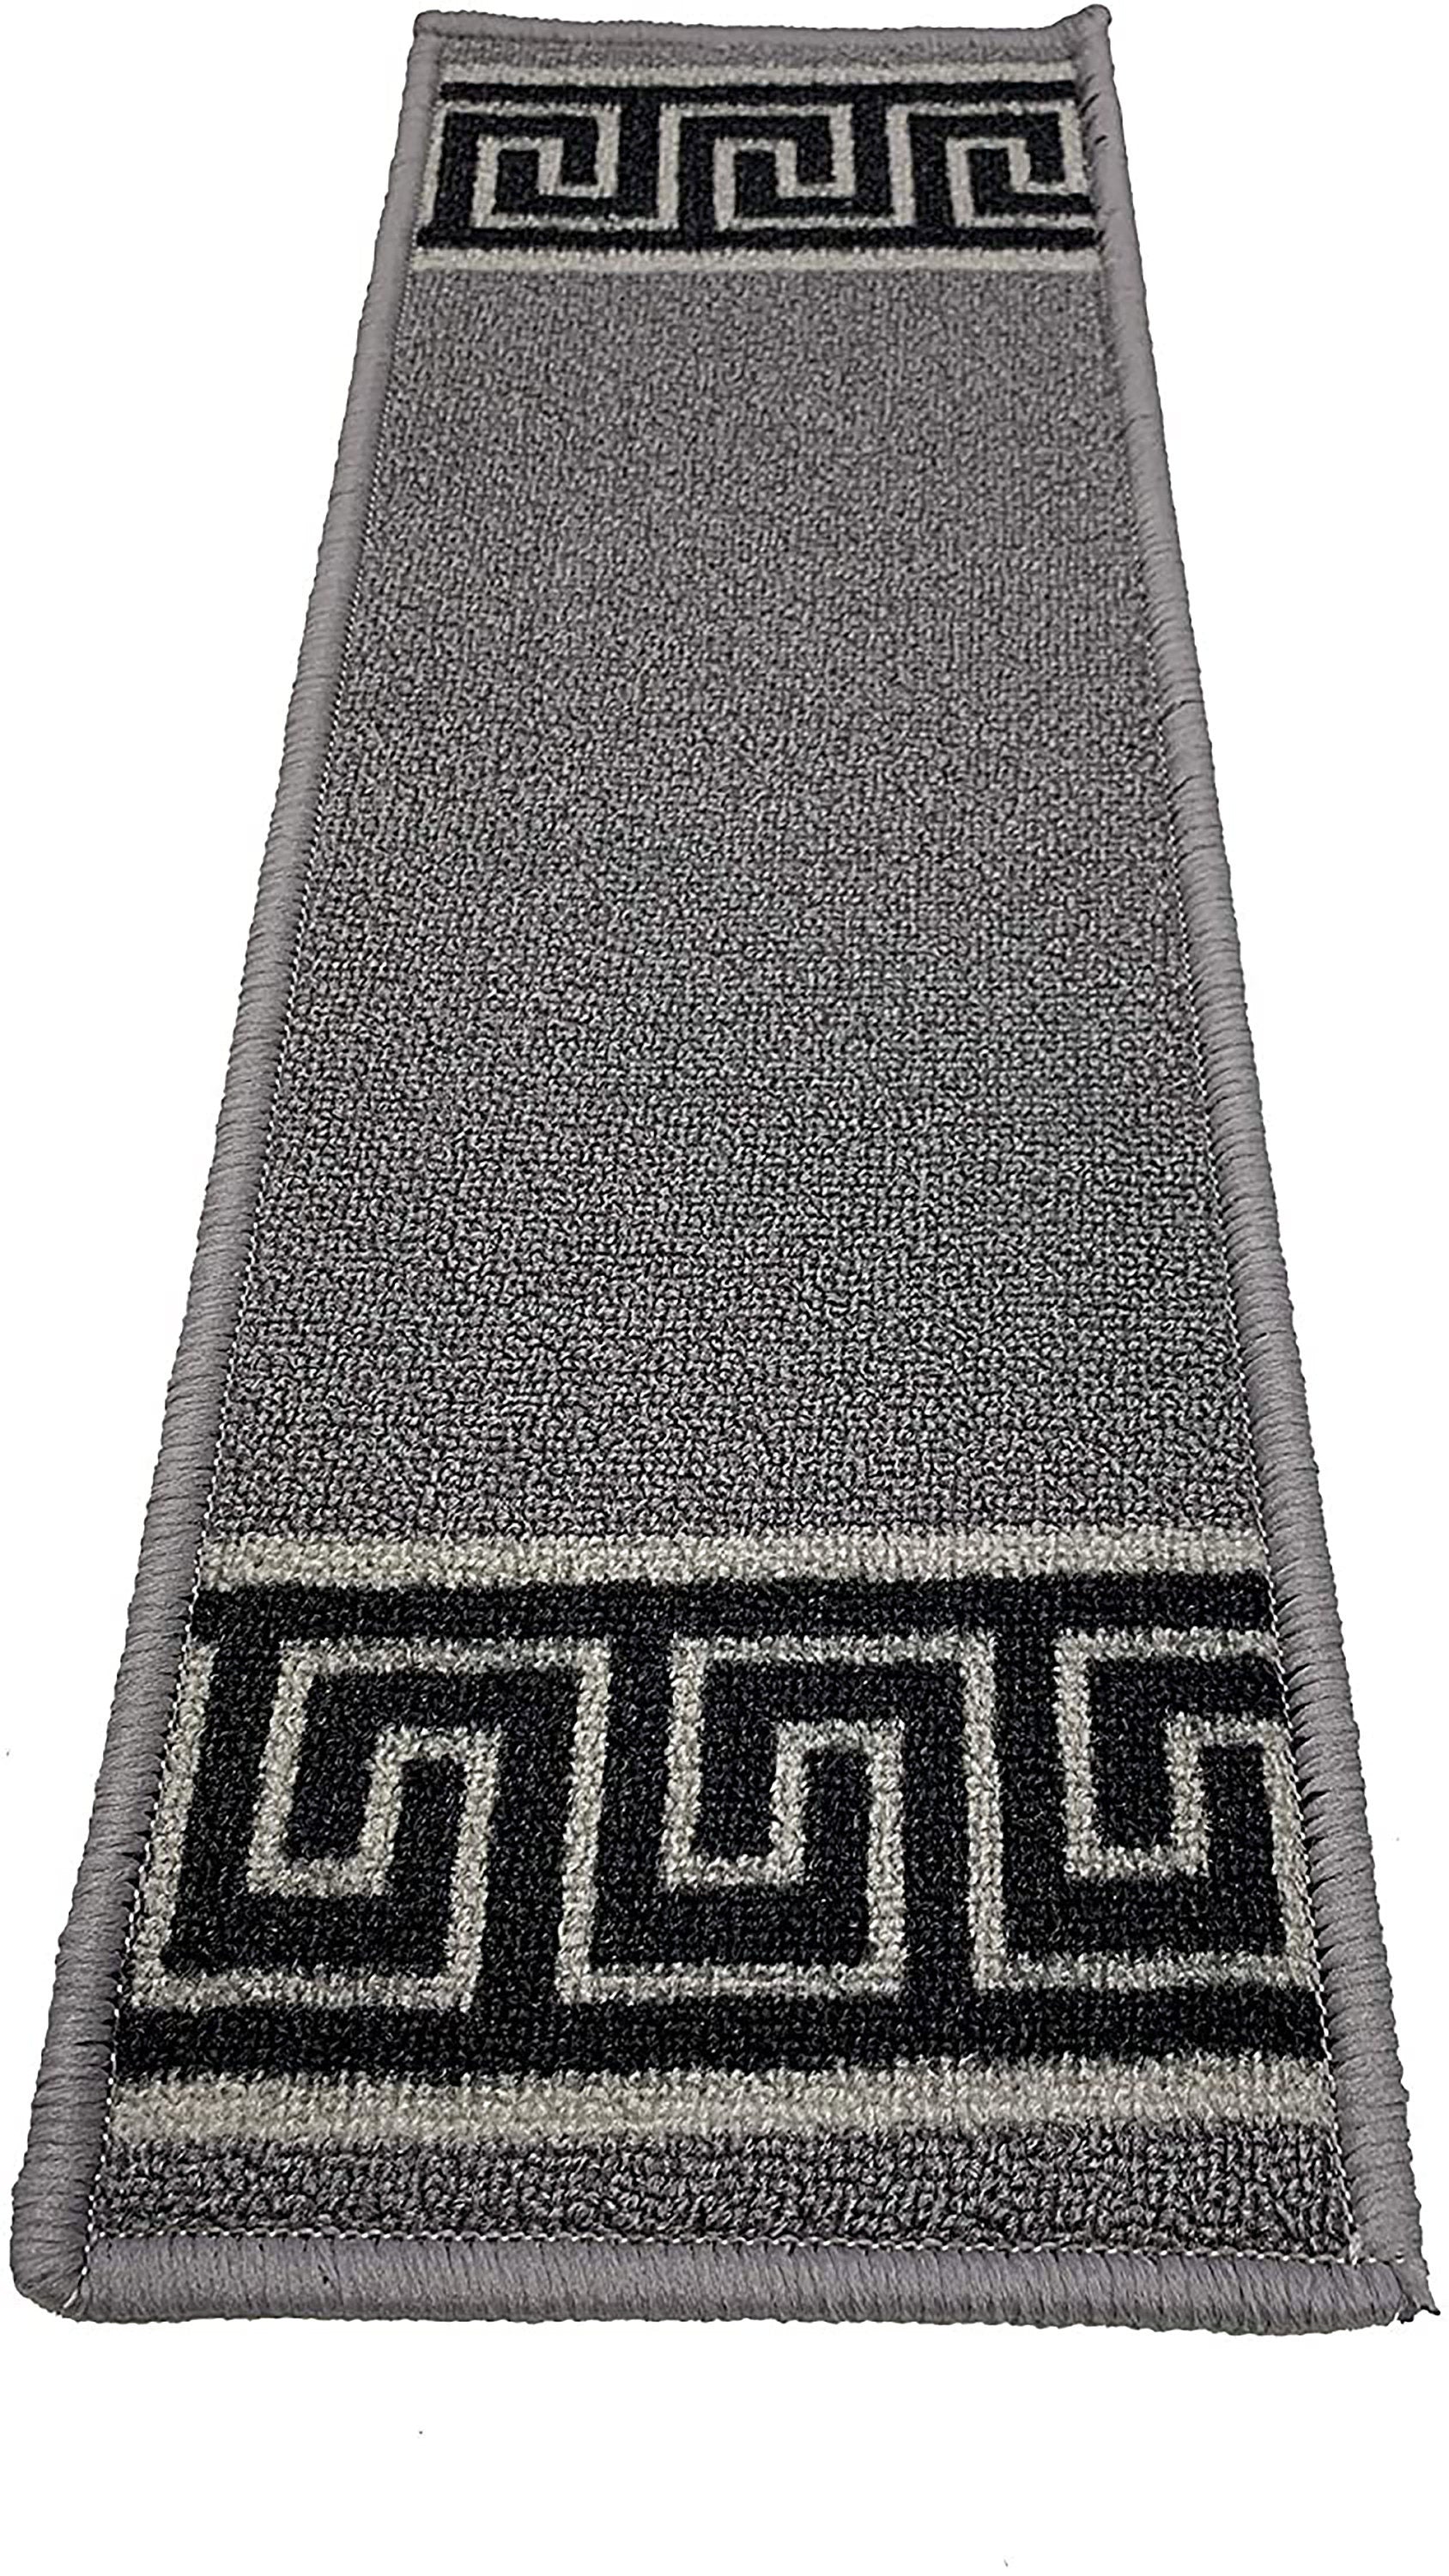 Machine Washable Stair Tread Greek Key Bordered Black and Gray Skid Resistant Latex Back Carpet Stair Treads Size 8.5" x 26" Many Set Option